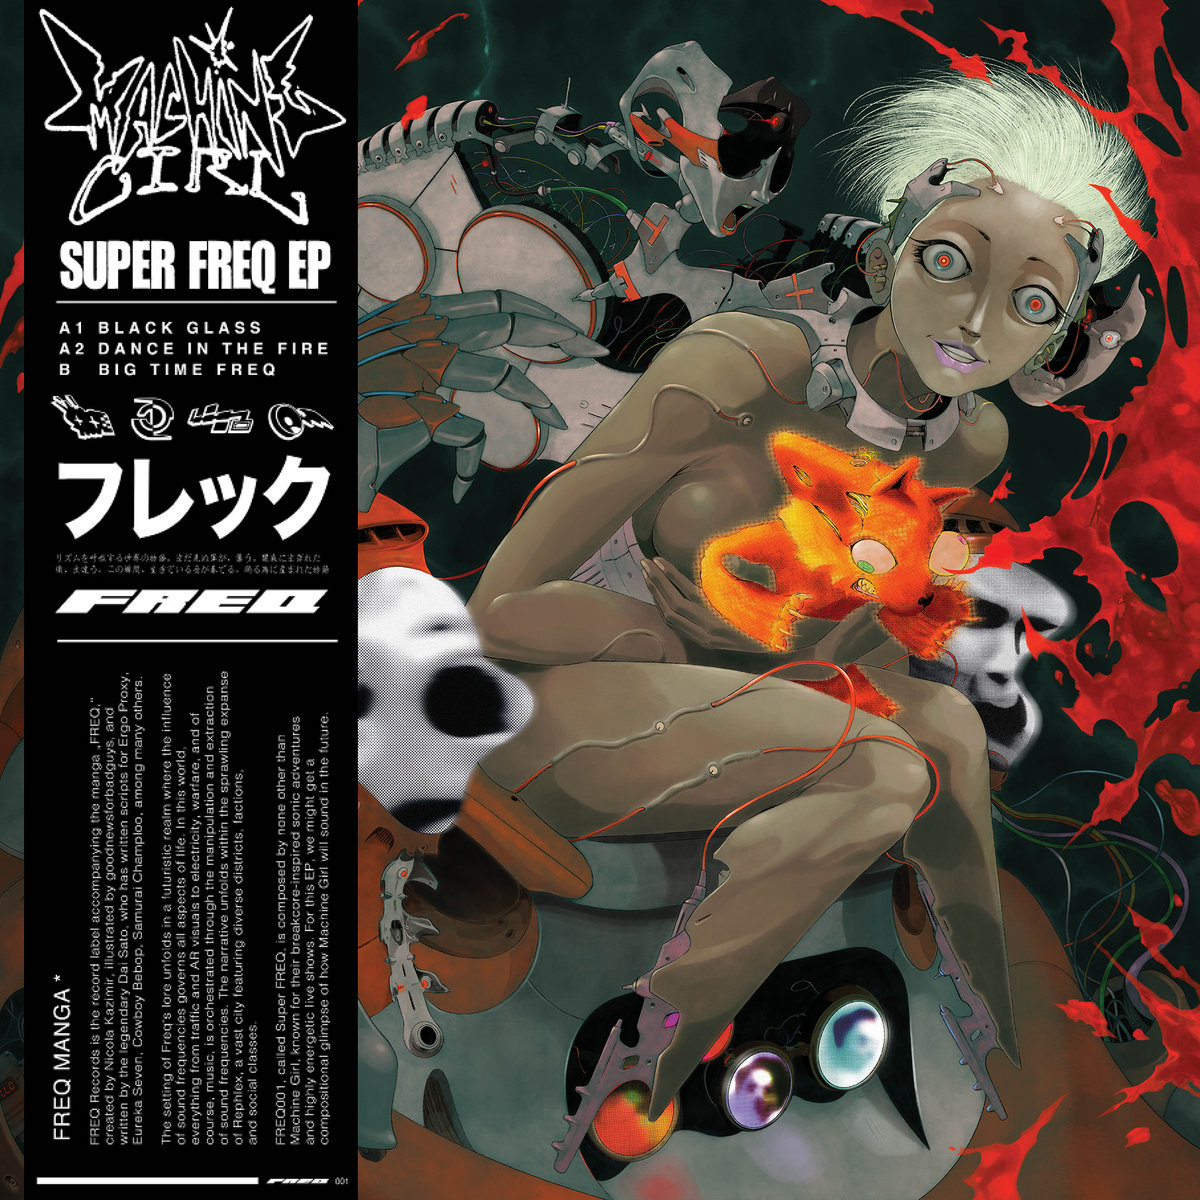 the cover art for the 'Super Freq' EP by Machine Girl